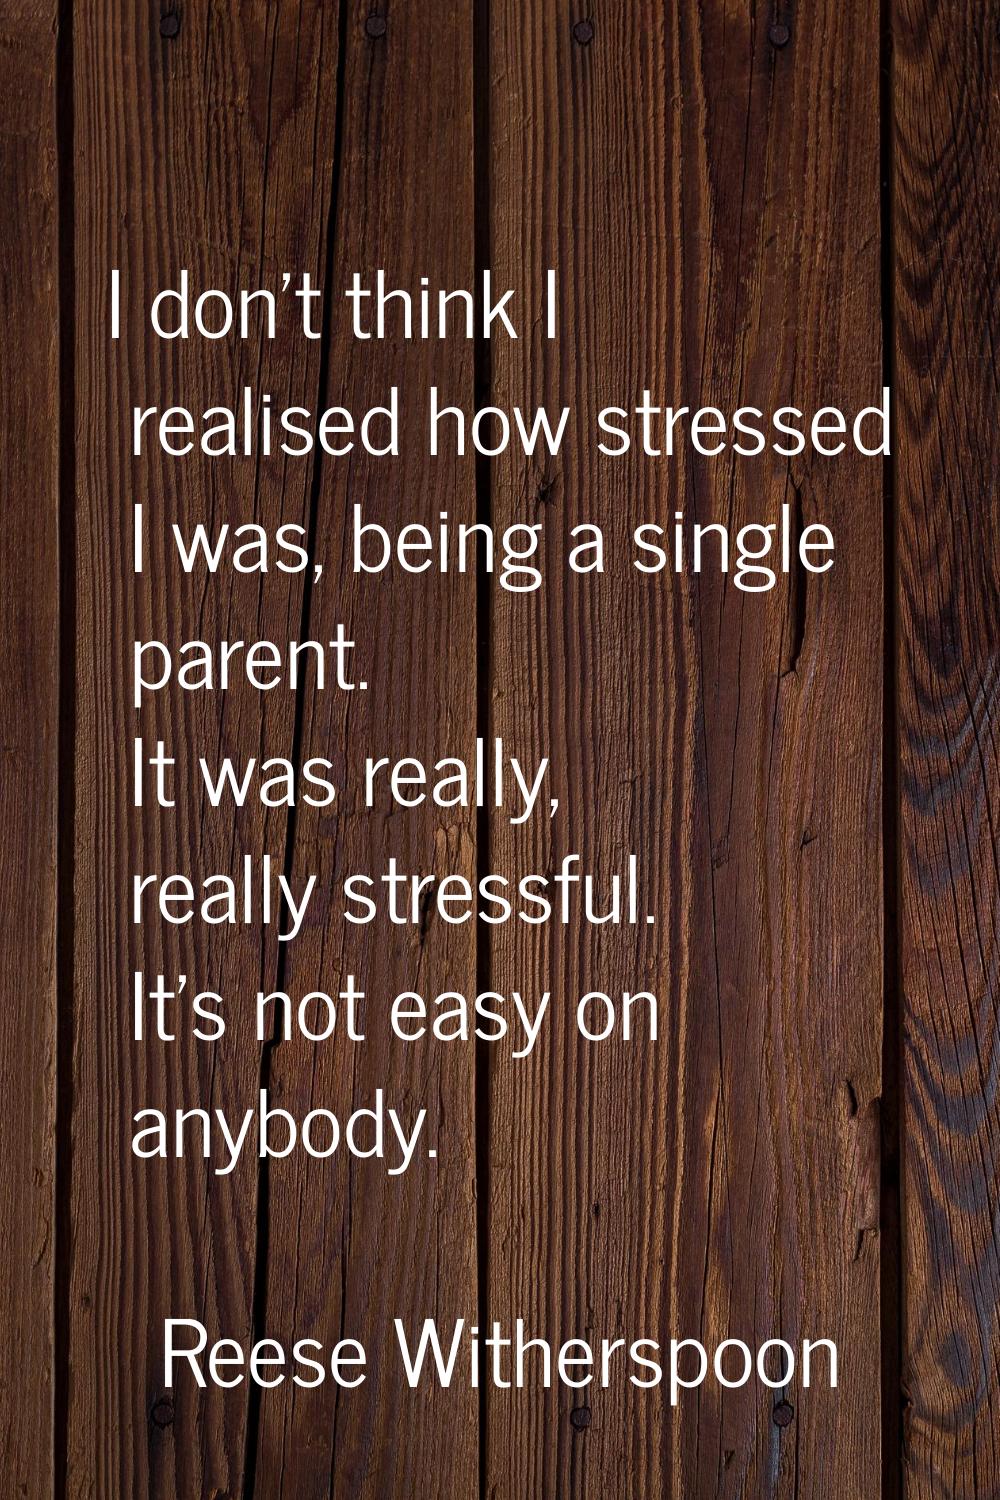 I don't think I realised how stressed I was, being a single parent. It was really, really stressful